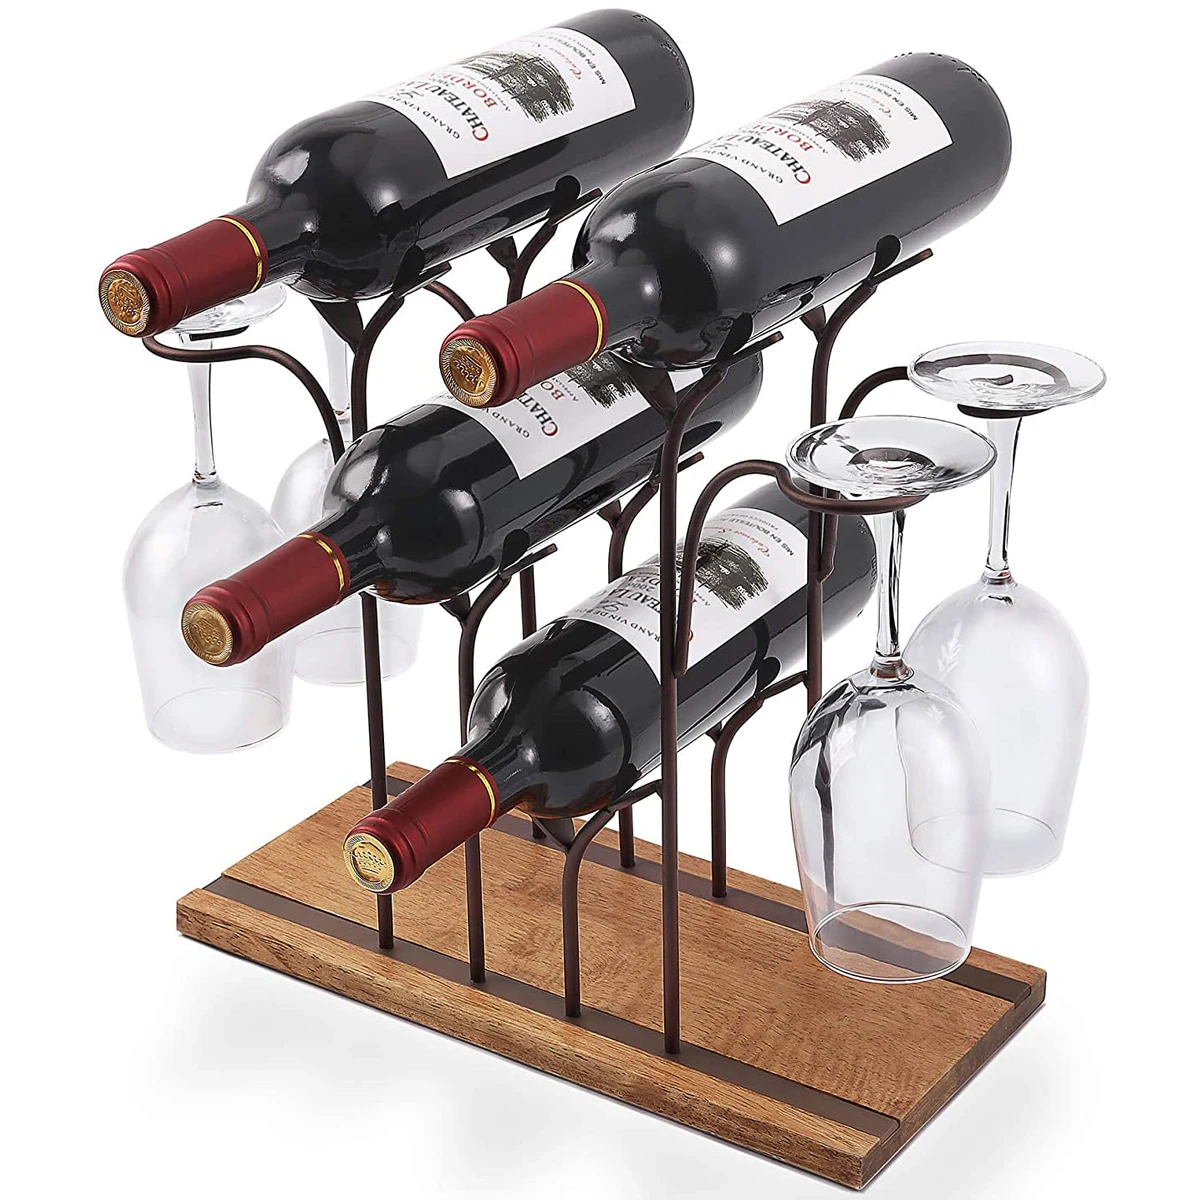 

Tabletop Wine Holder Countertop Wine Rack for Home Decor Kitchen Storage Bar, , Hold 4 Wine Bottles and 4 Glasses, Bronze